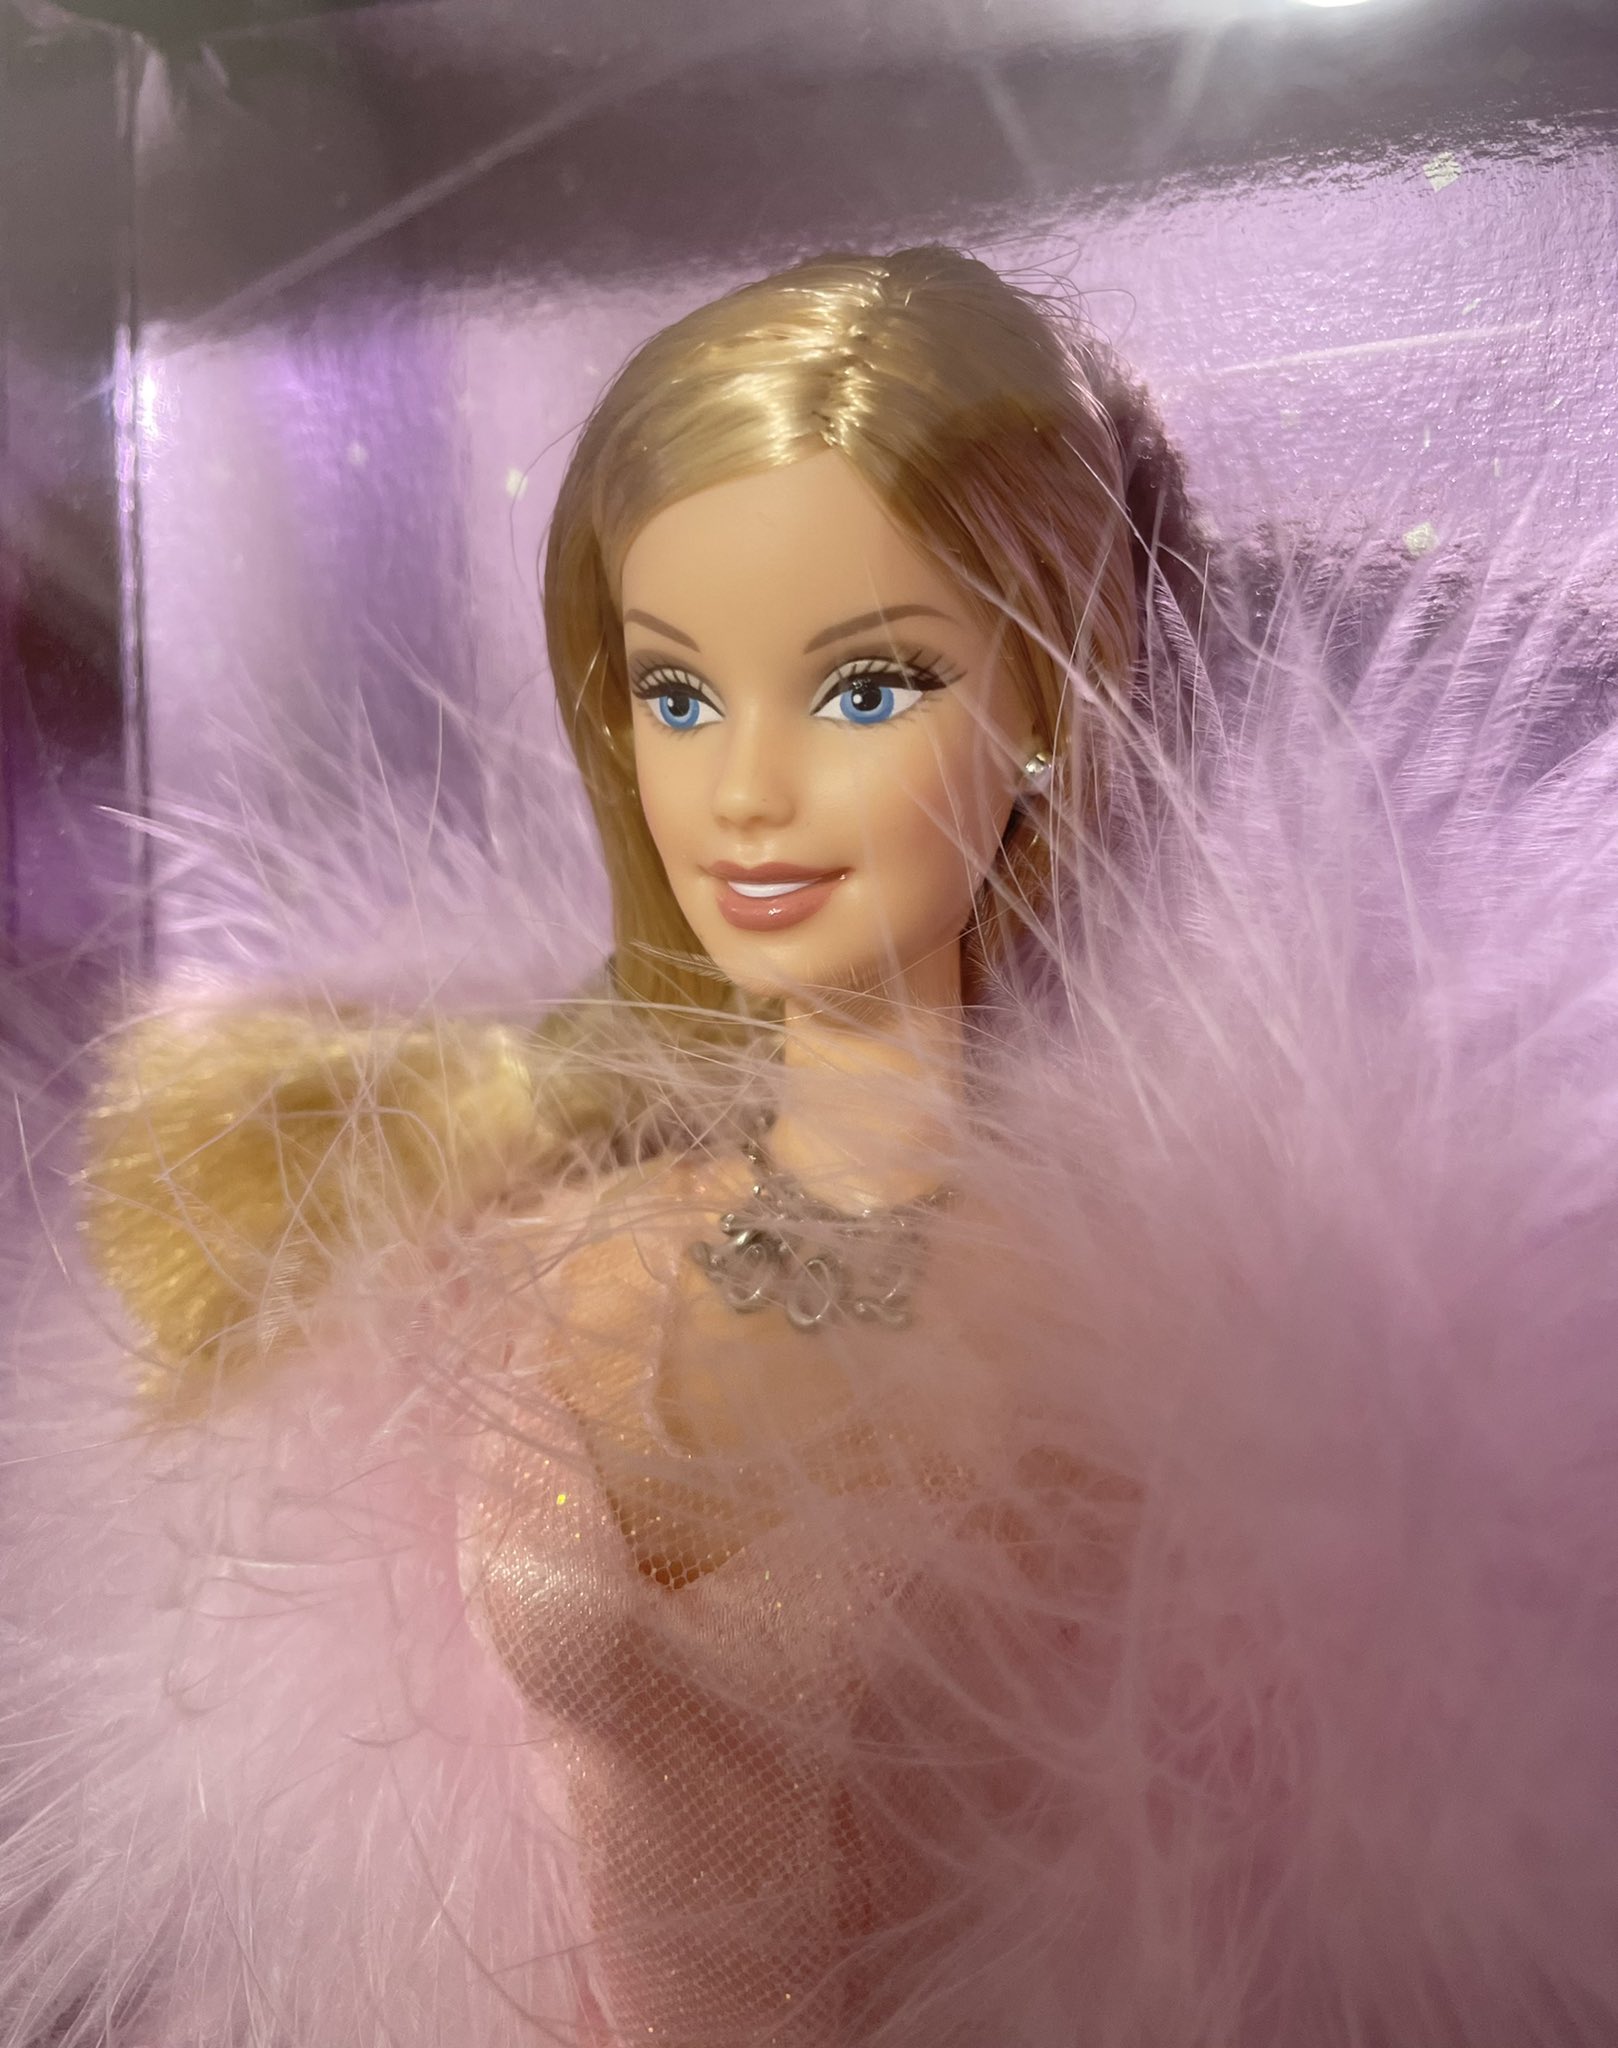 stad burgemeester veel plezier Amar on Twitter: "Barbie 2 0 0 2….🌸 I love how Barbie she is and her face  is so fresh and stunning, adore her little chain necklace and the feather  boa…haute #Barbie